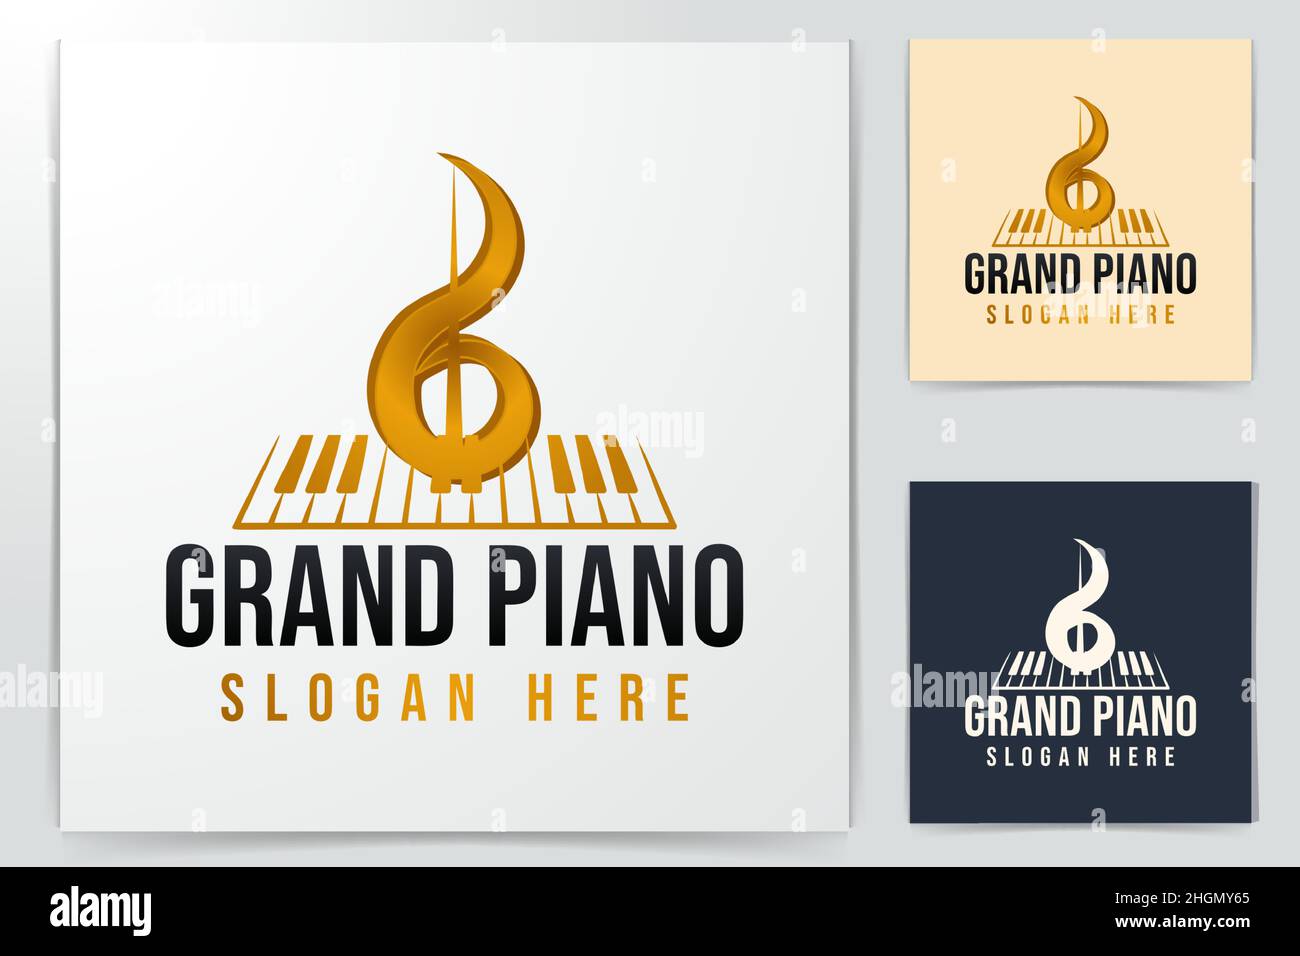 Grand Piano Logo Ideas. Inspiration logo design. Template Vector Illustration. Isolated On White Background Stock Vector